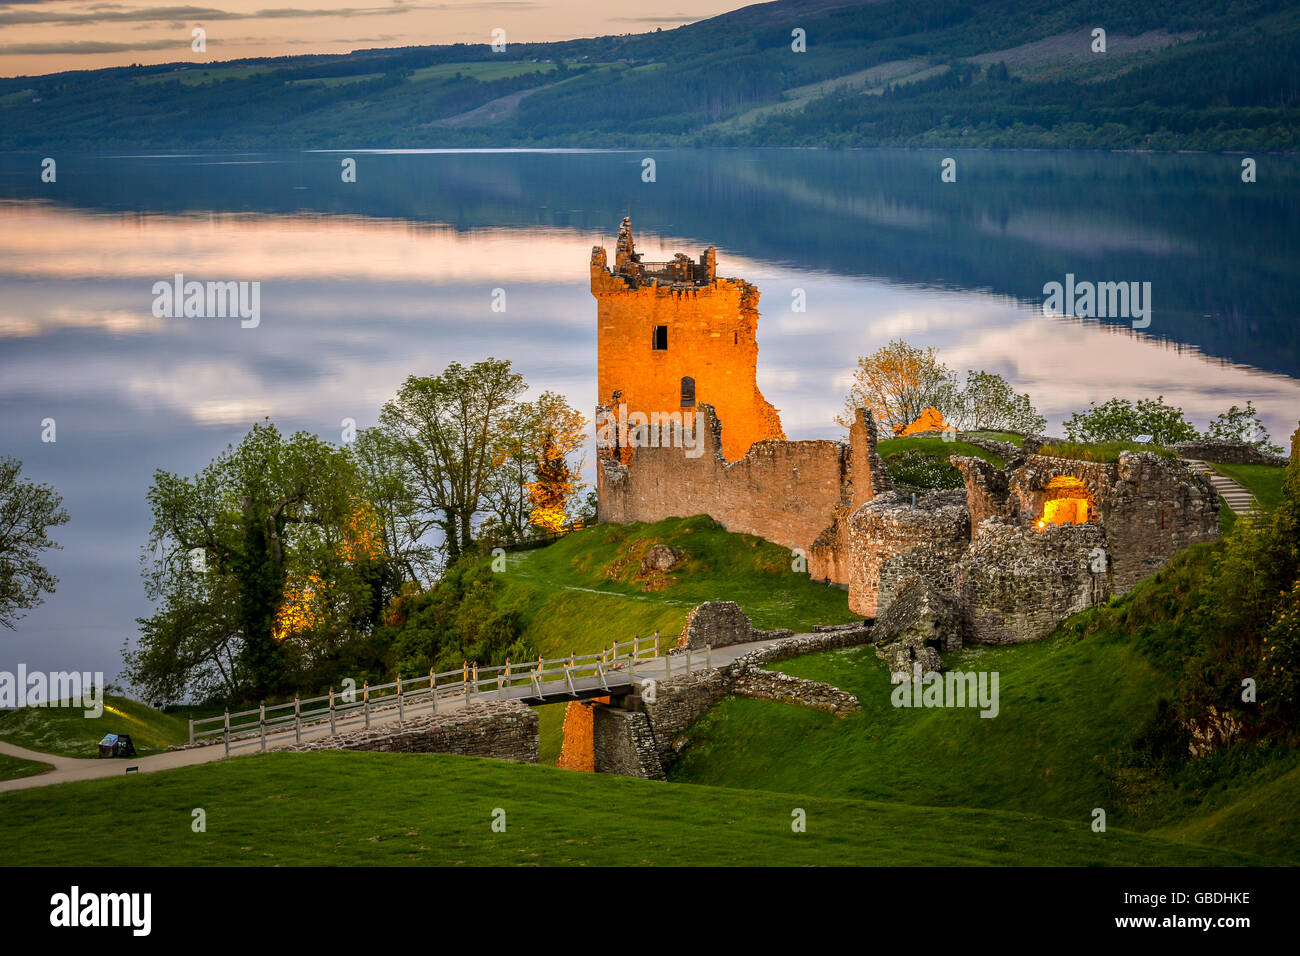 Urquhart Castle at twilight. The castle sits beside Loch Ness, near Inverness and Drumnadrochit, in the Highlands of Scotland. Stock Photo